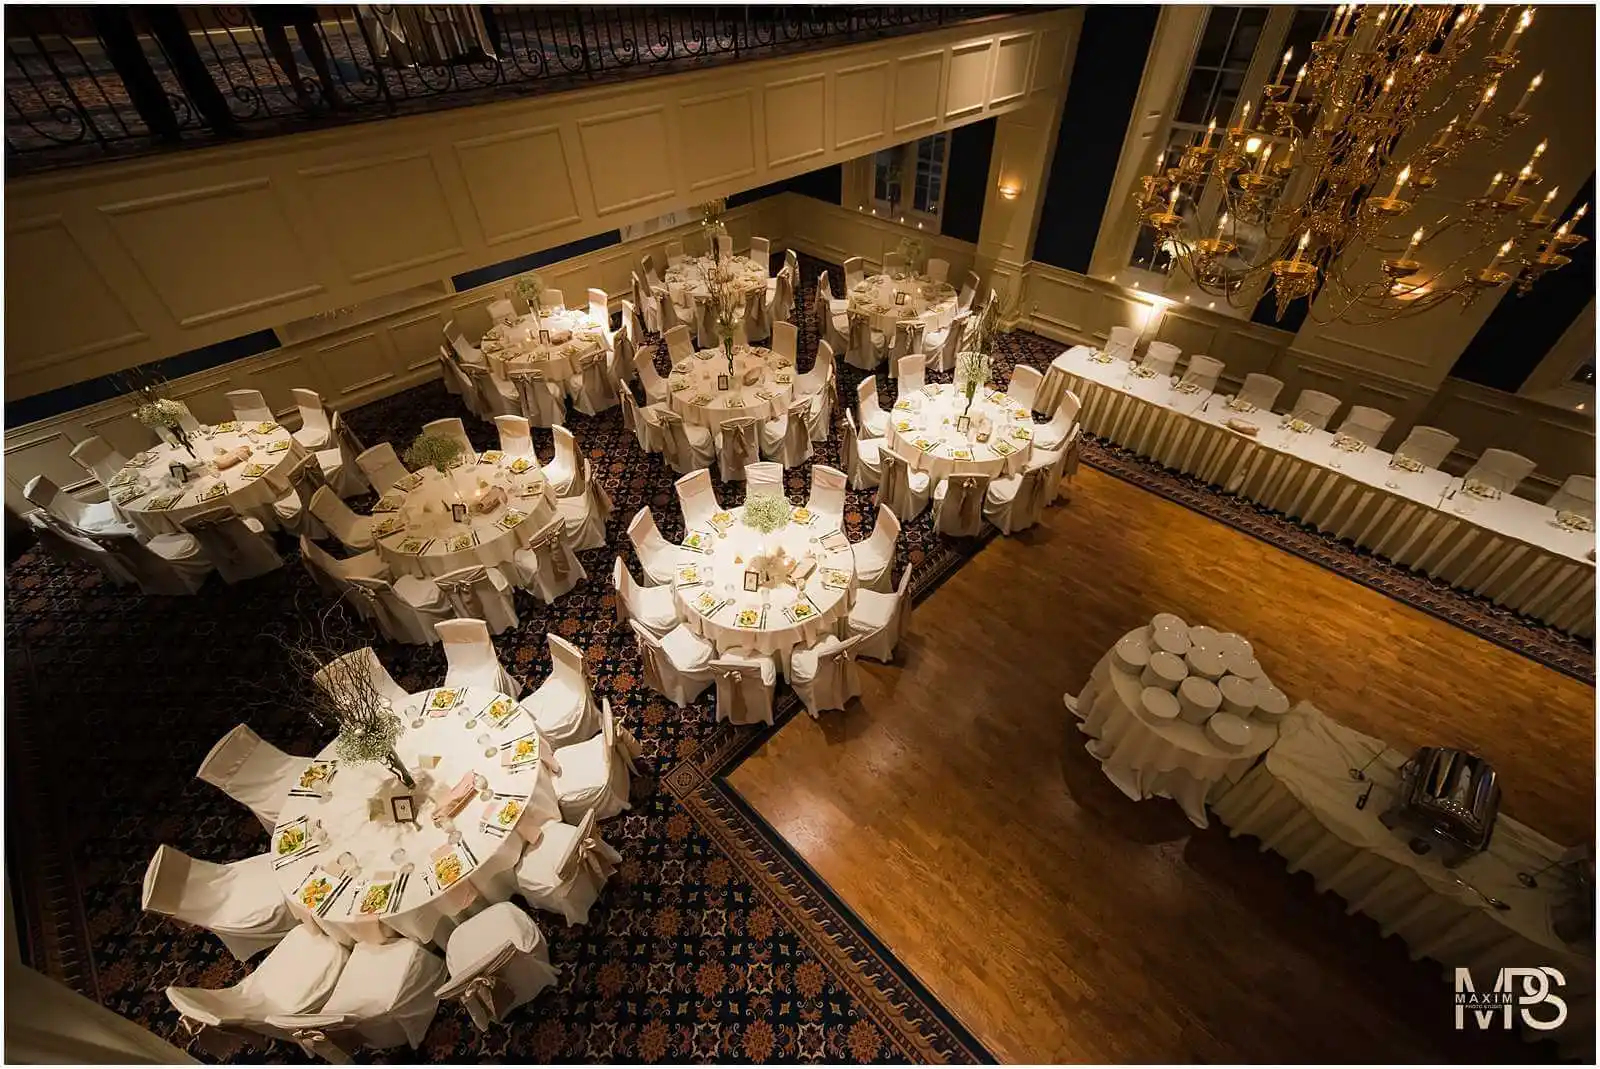 Luxurious banquet hall in Covington set for elegant dining event.